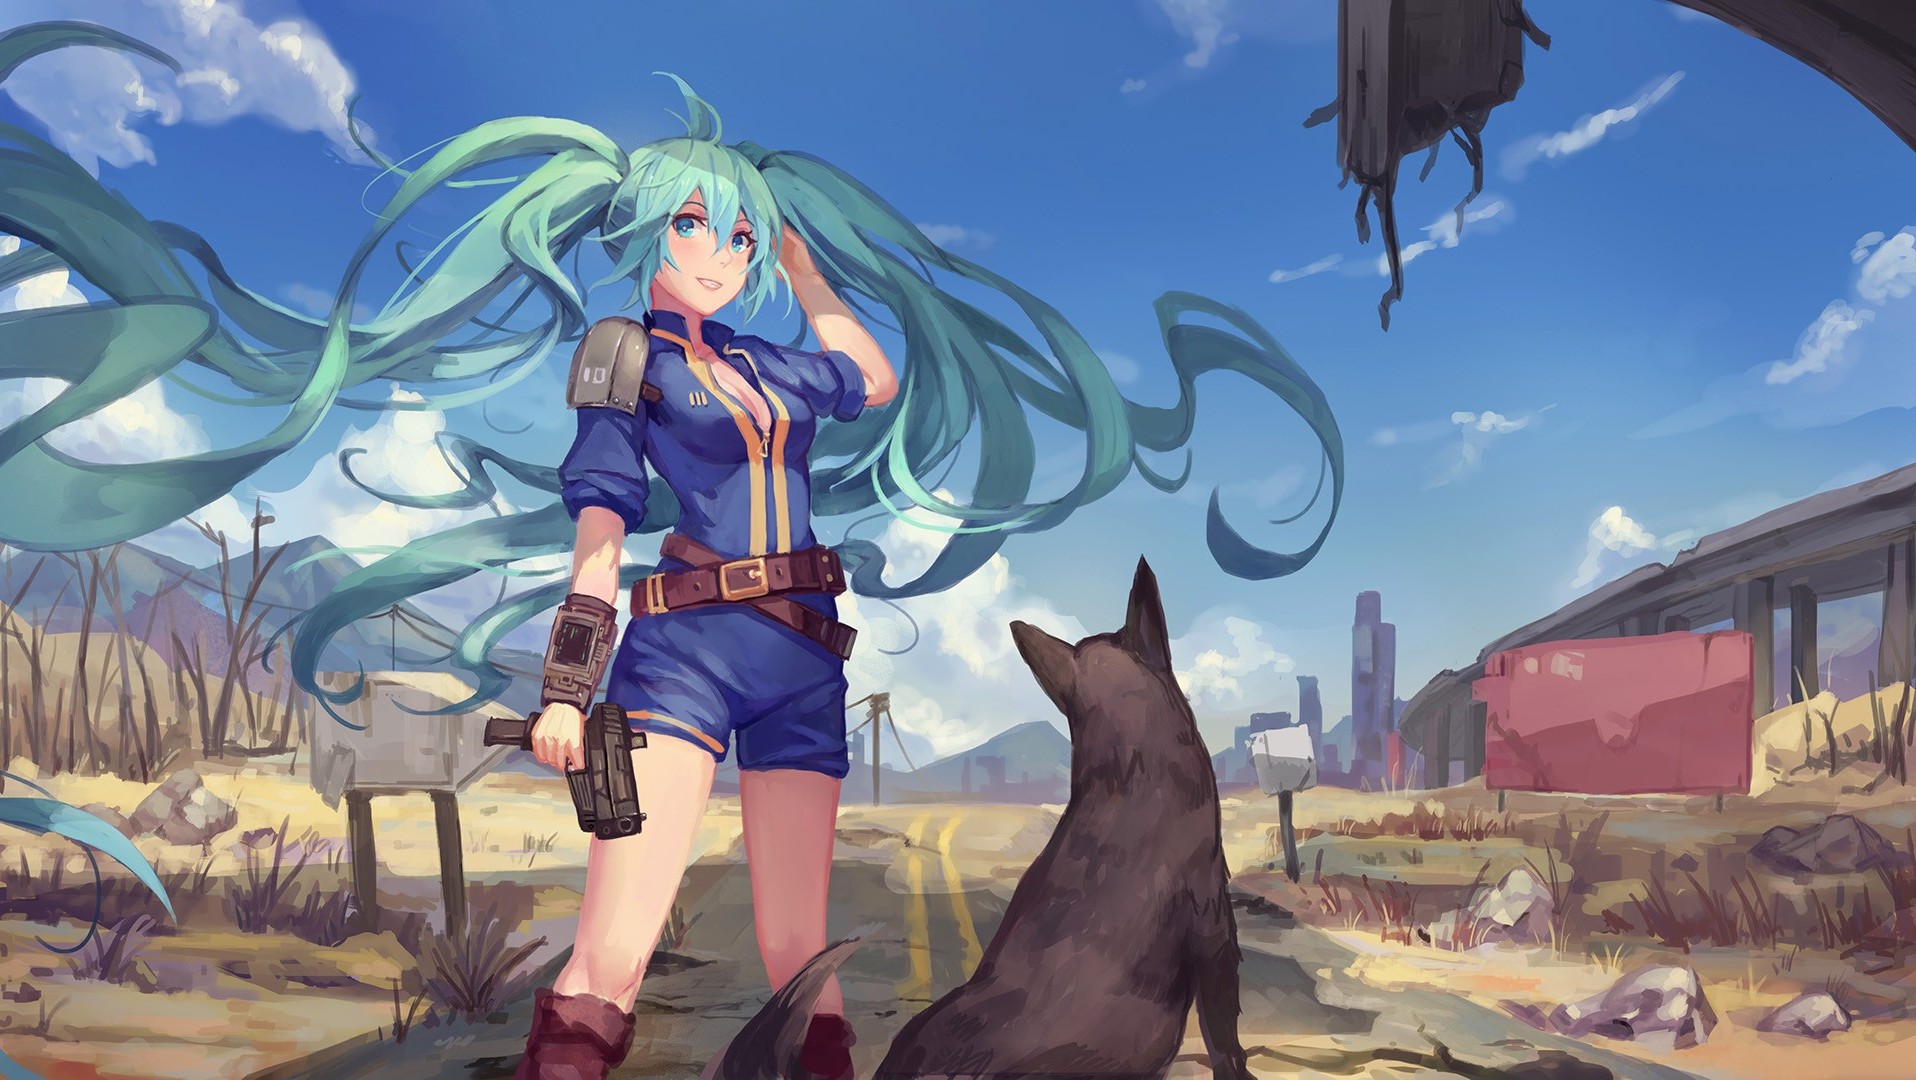 Fallout 4, Vocaloid, Hatsune Miku, Crossover, Dog, Anime Girls, Twintails, Apocalyptic, Pistol, Gun, Weapon, Fallout Wallpaper